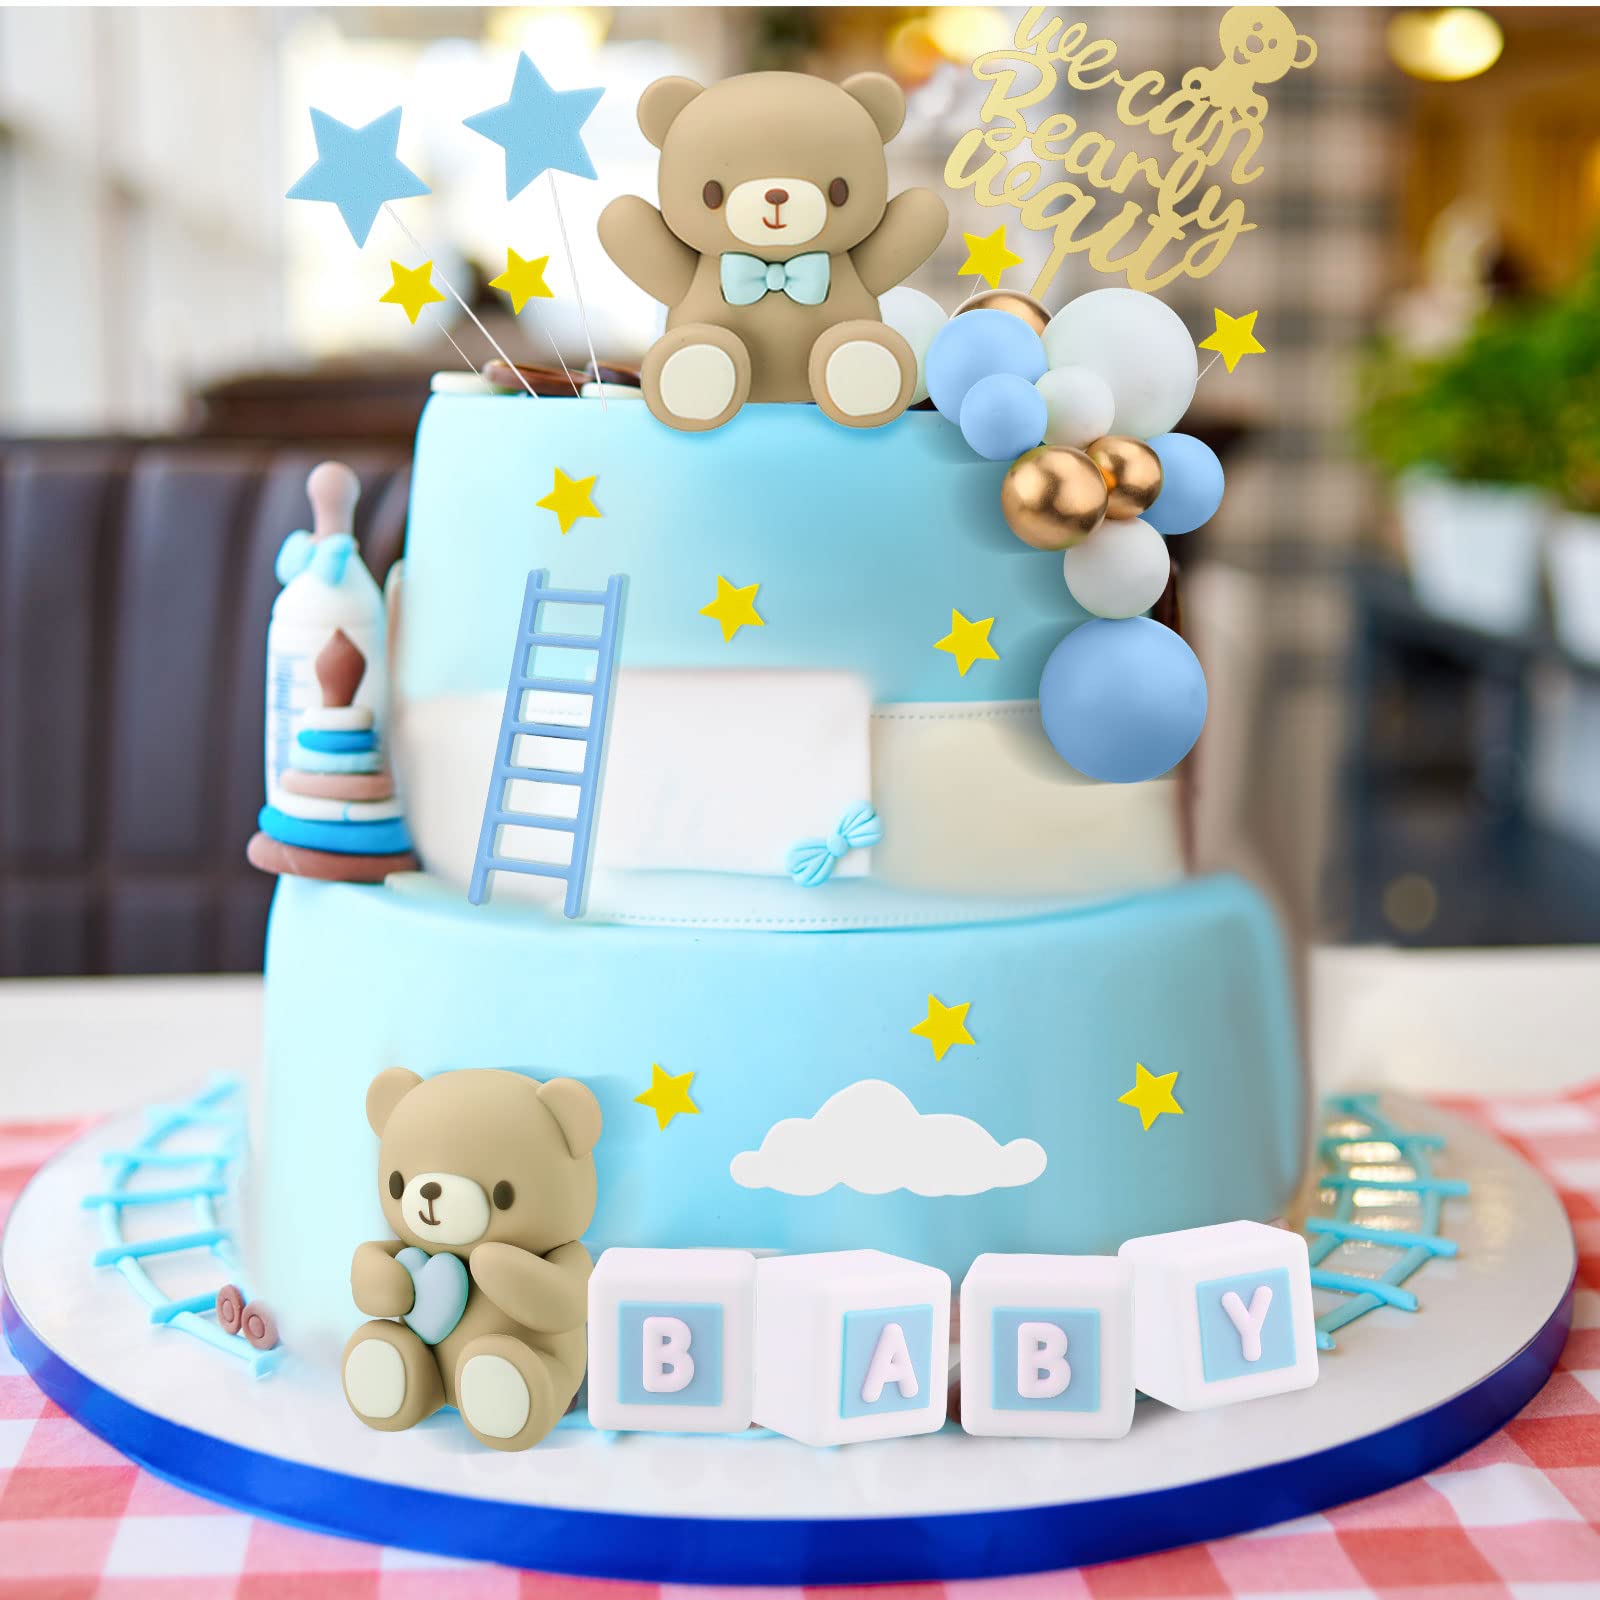 41 Pcs/Set Bear Cake Toppers Mini Bear Cake Decorations Cake Toppers Gold White Pearl Ball for Boy Girl Baby Shower Birthday Party Decorations(Blue, Brown, Cute Style)